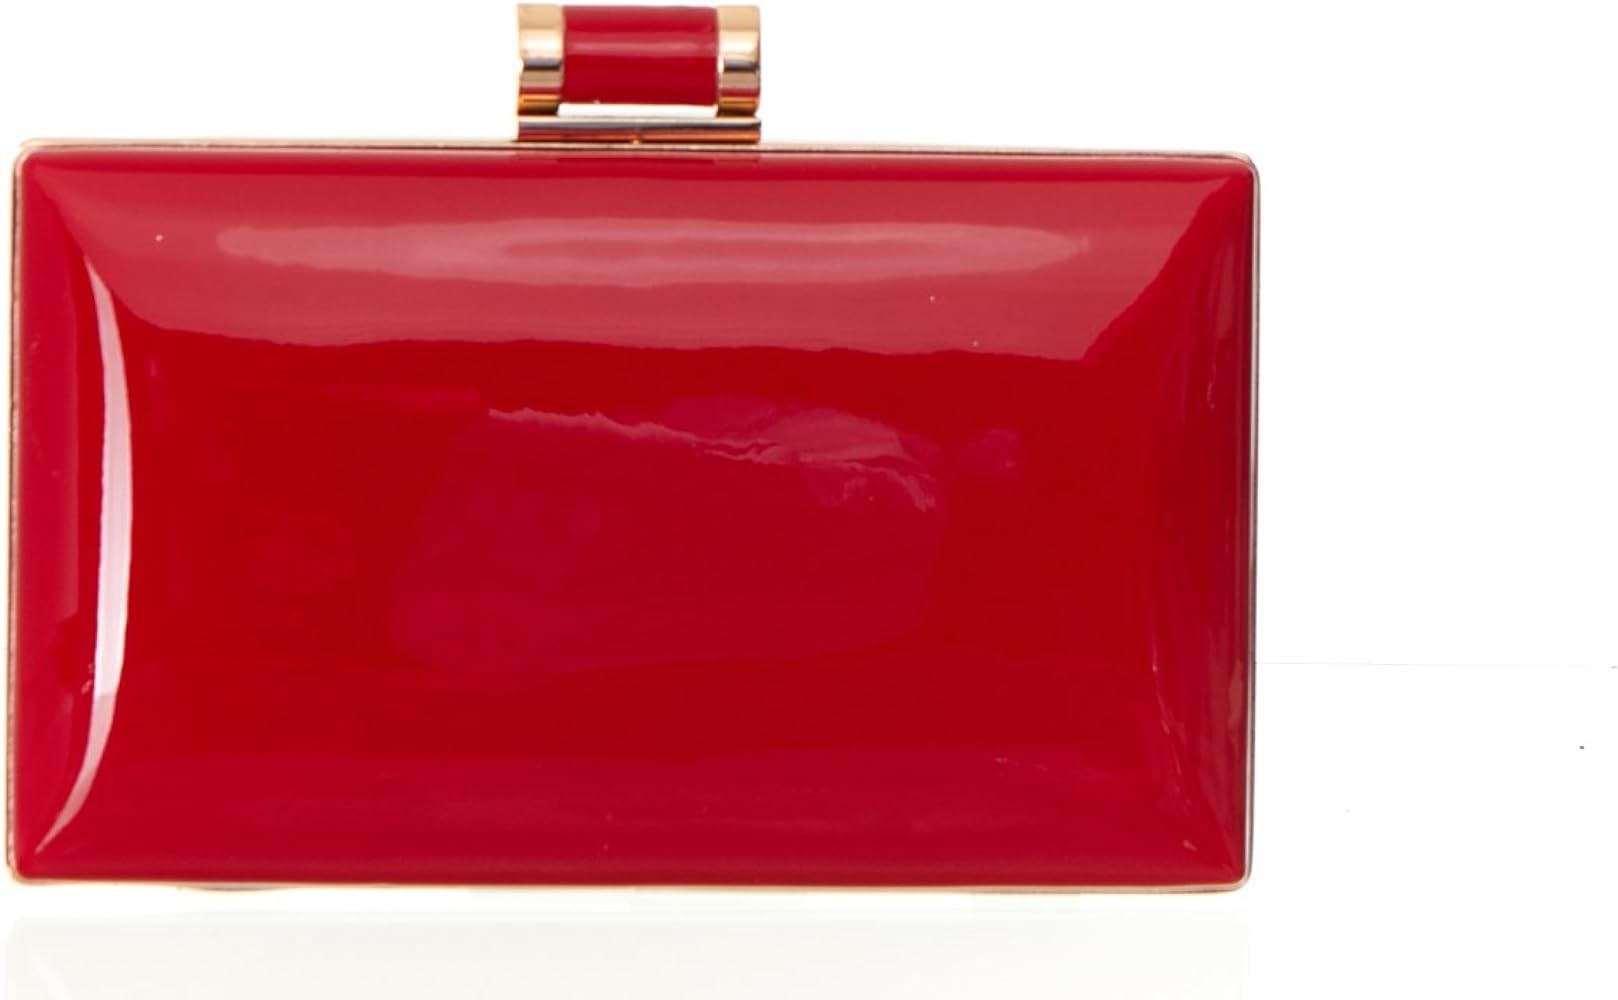 Faux Patent Leather Rectangular Box Candy Clutch With Top Clasp & Chain Strap For Women. | Amazon (US)